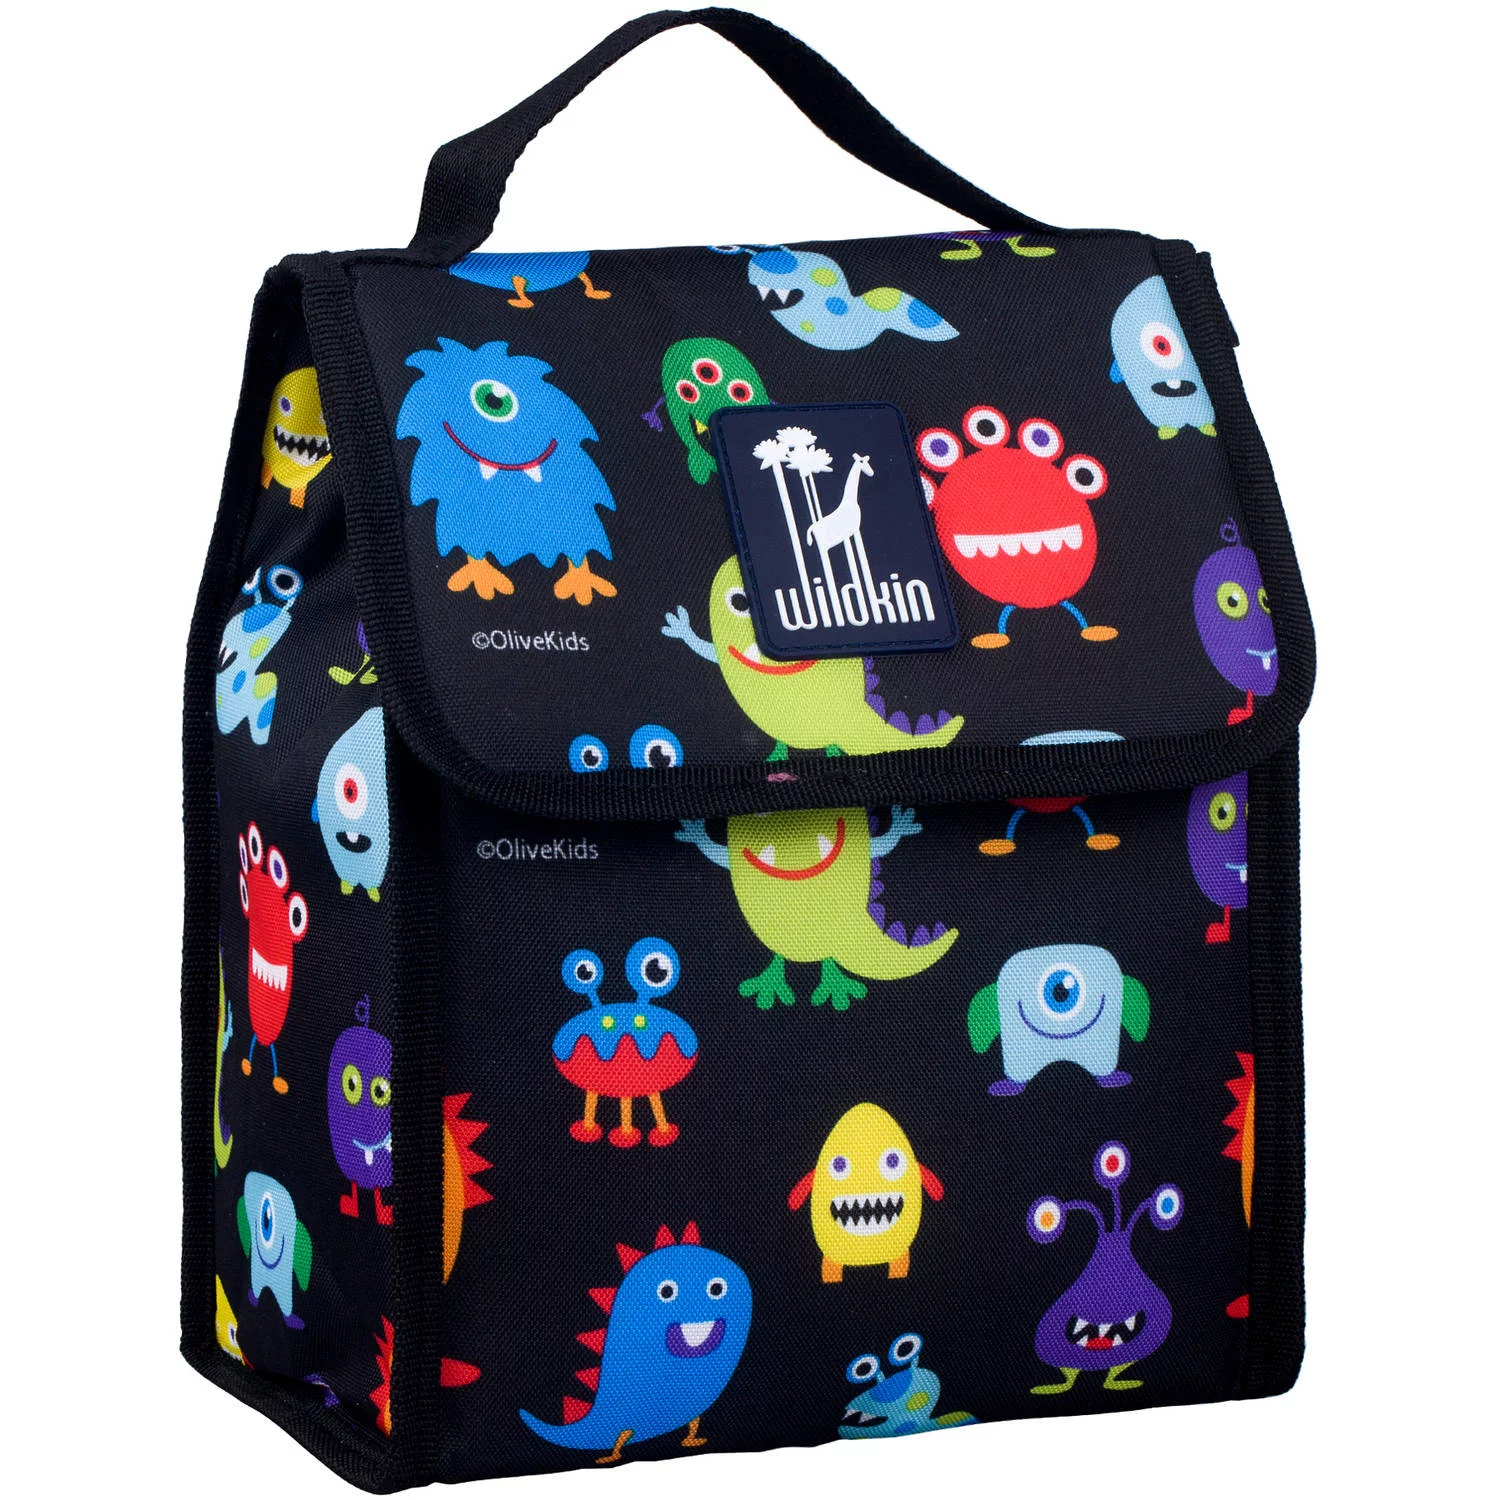 Lunch Bags Kids Will Love for School and Trips插图4